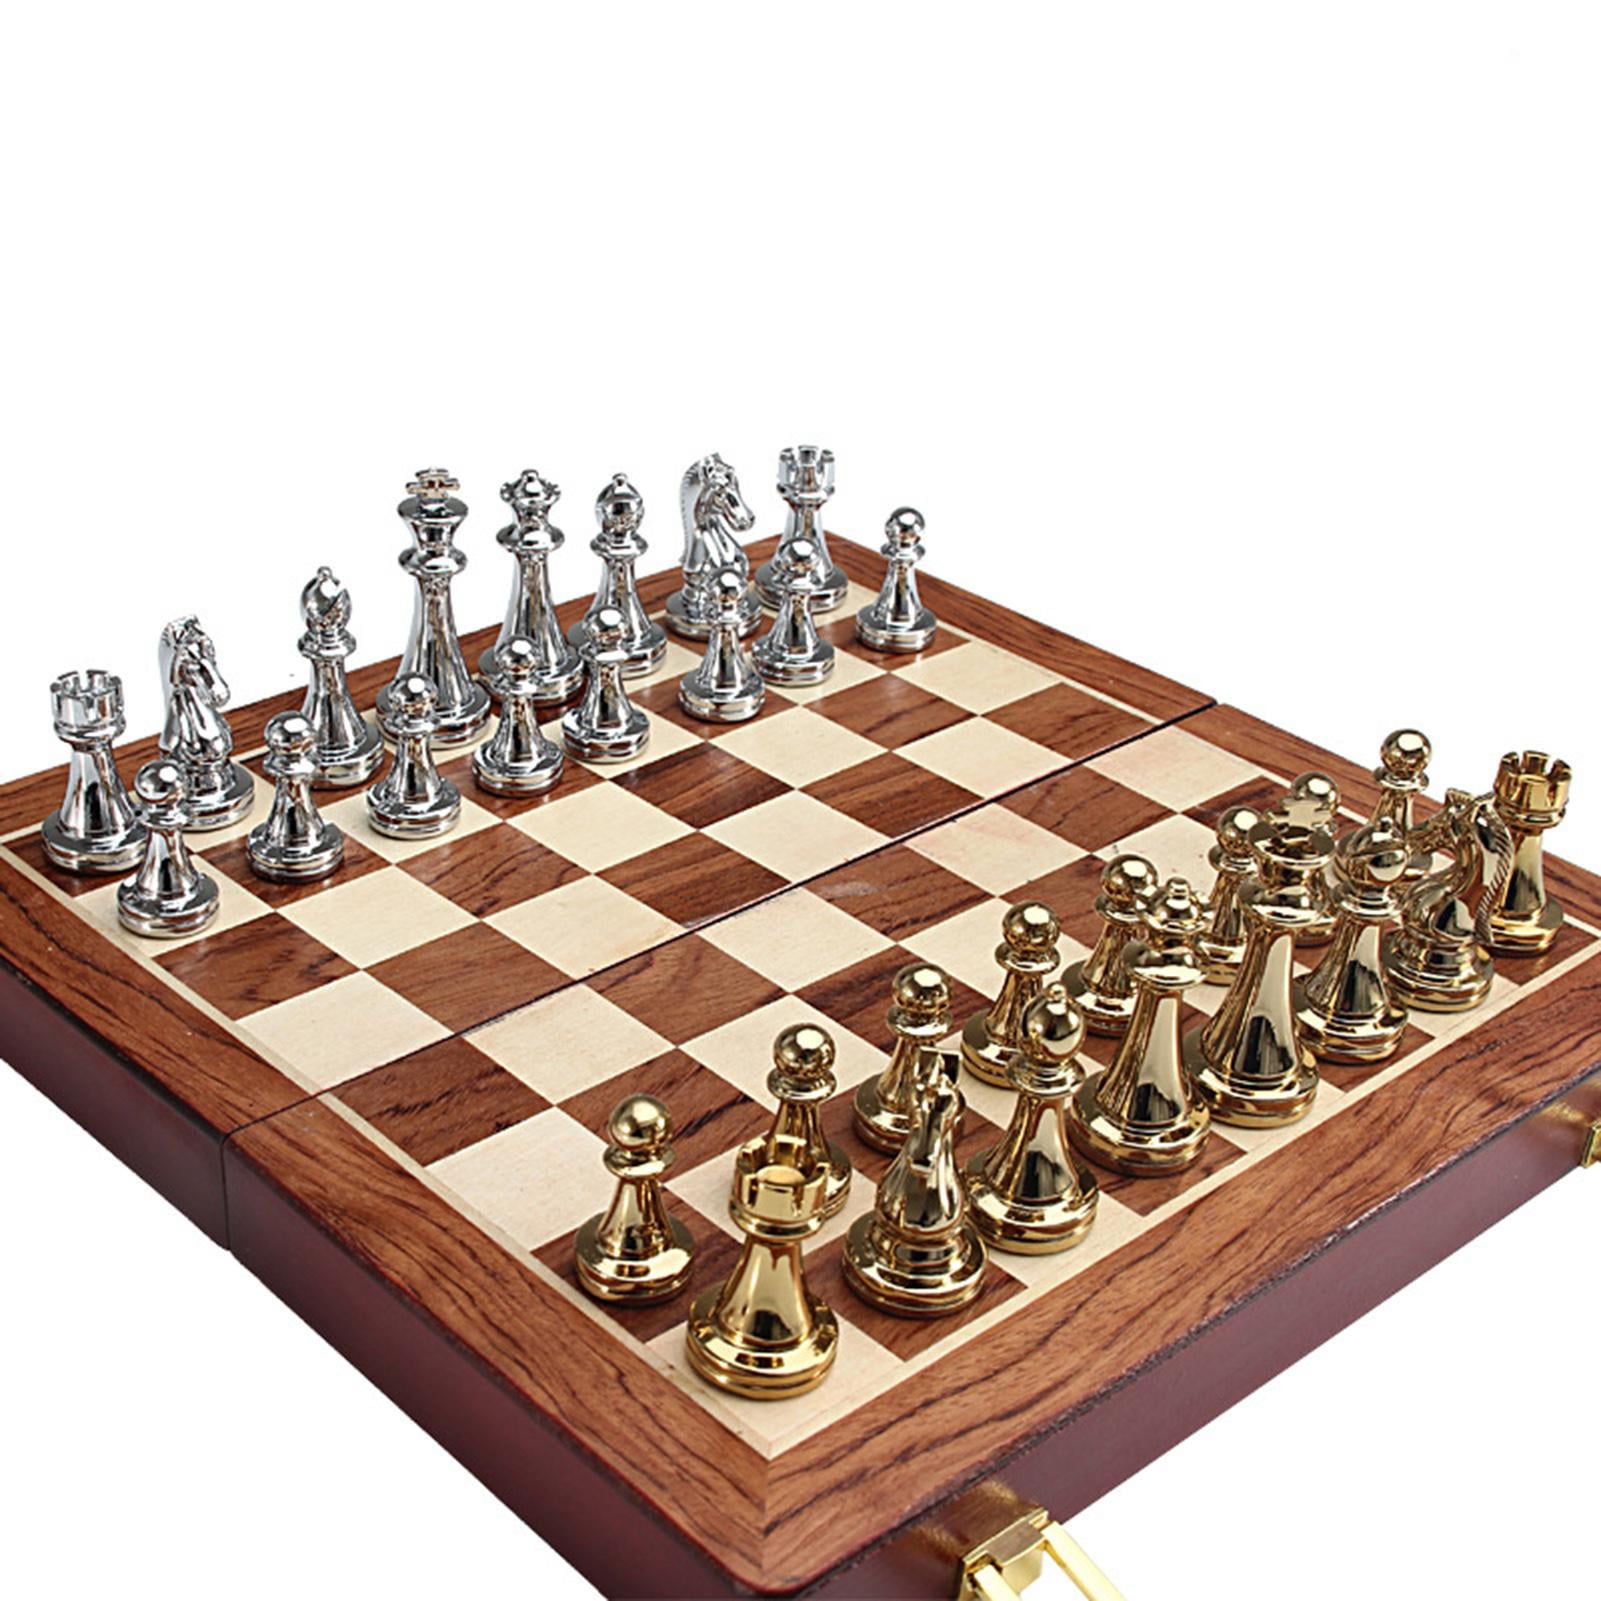 Details about   Large Chess Board Game Set with 100% Brass Chess Pieces for adults 14X14" board 